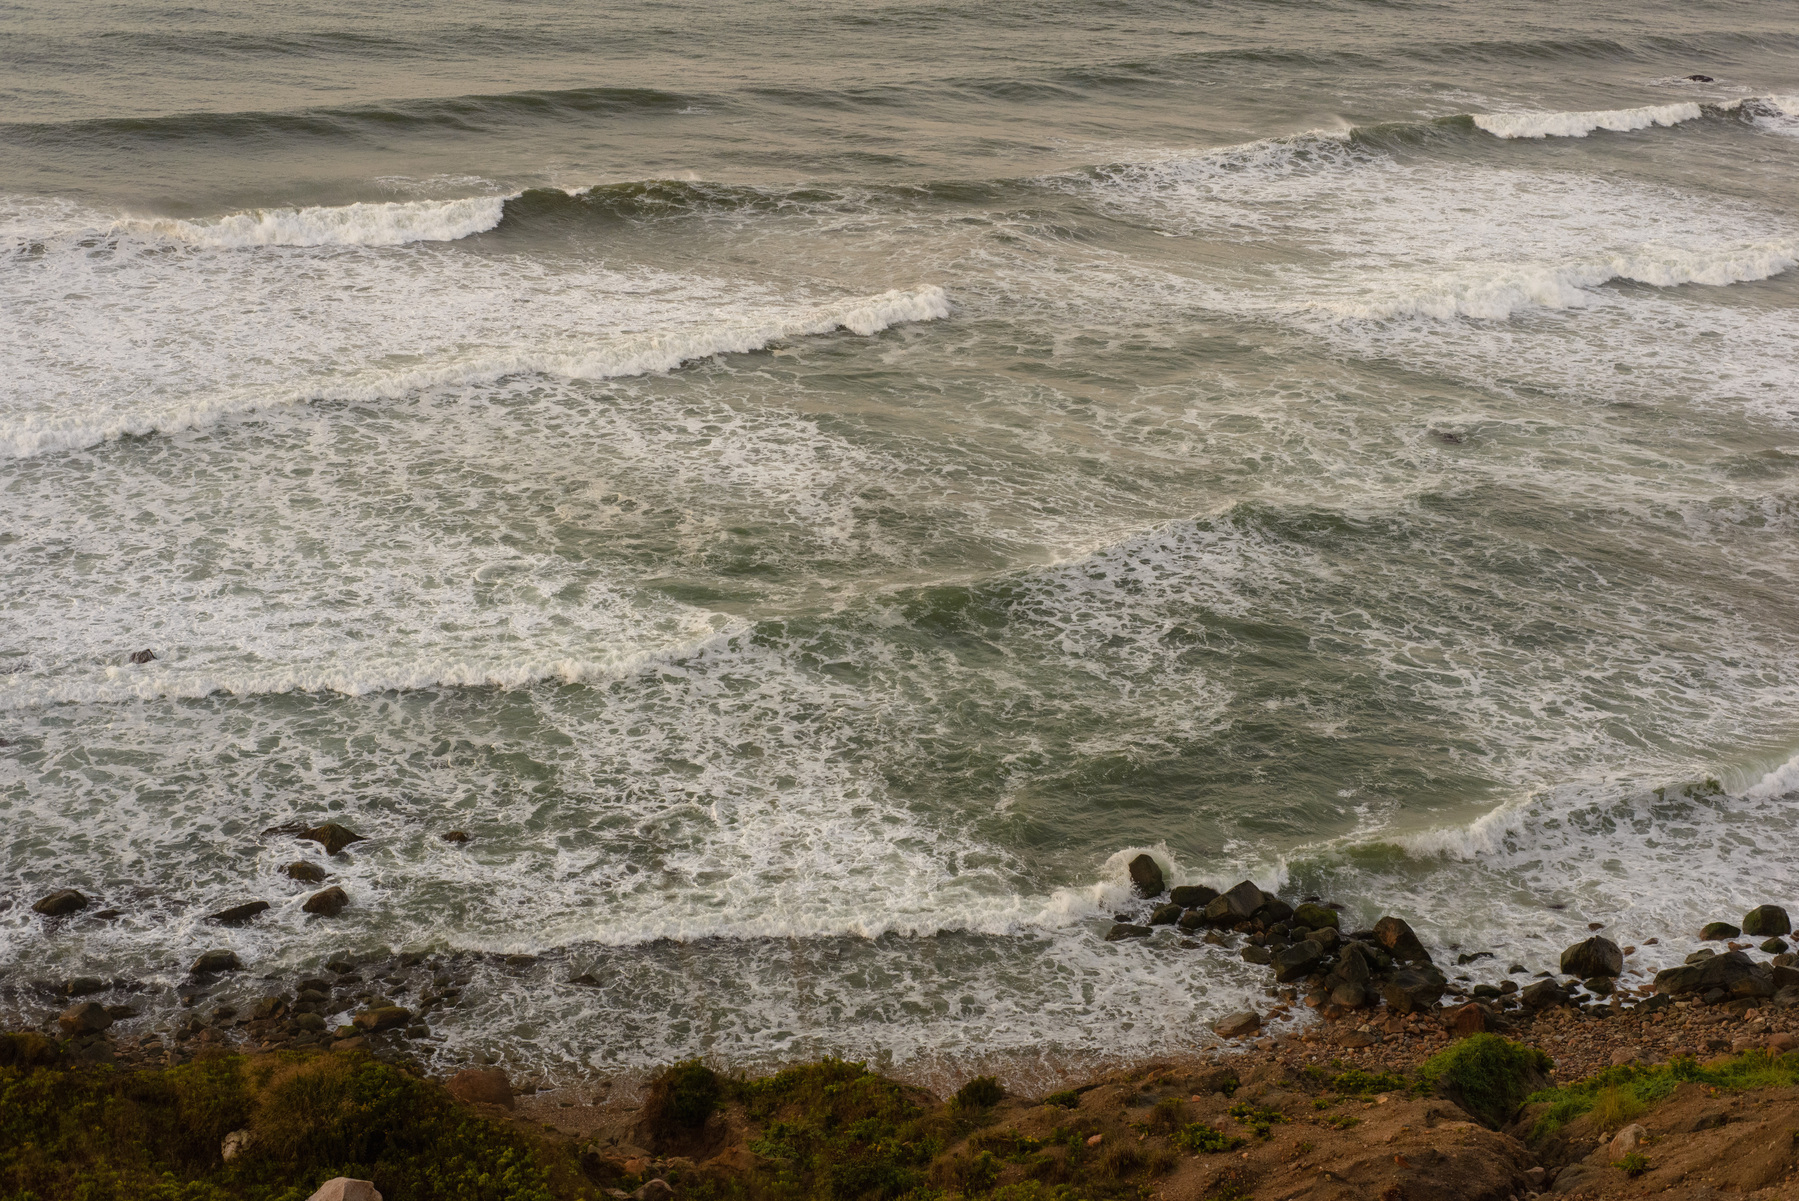 Ocean waves coming ashore from a bluff above.